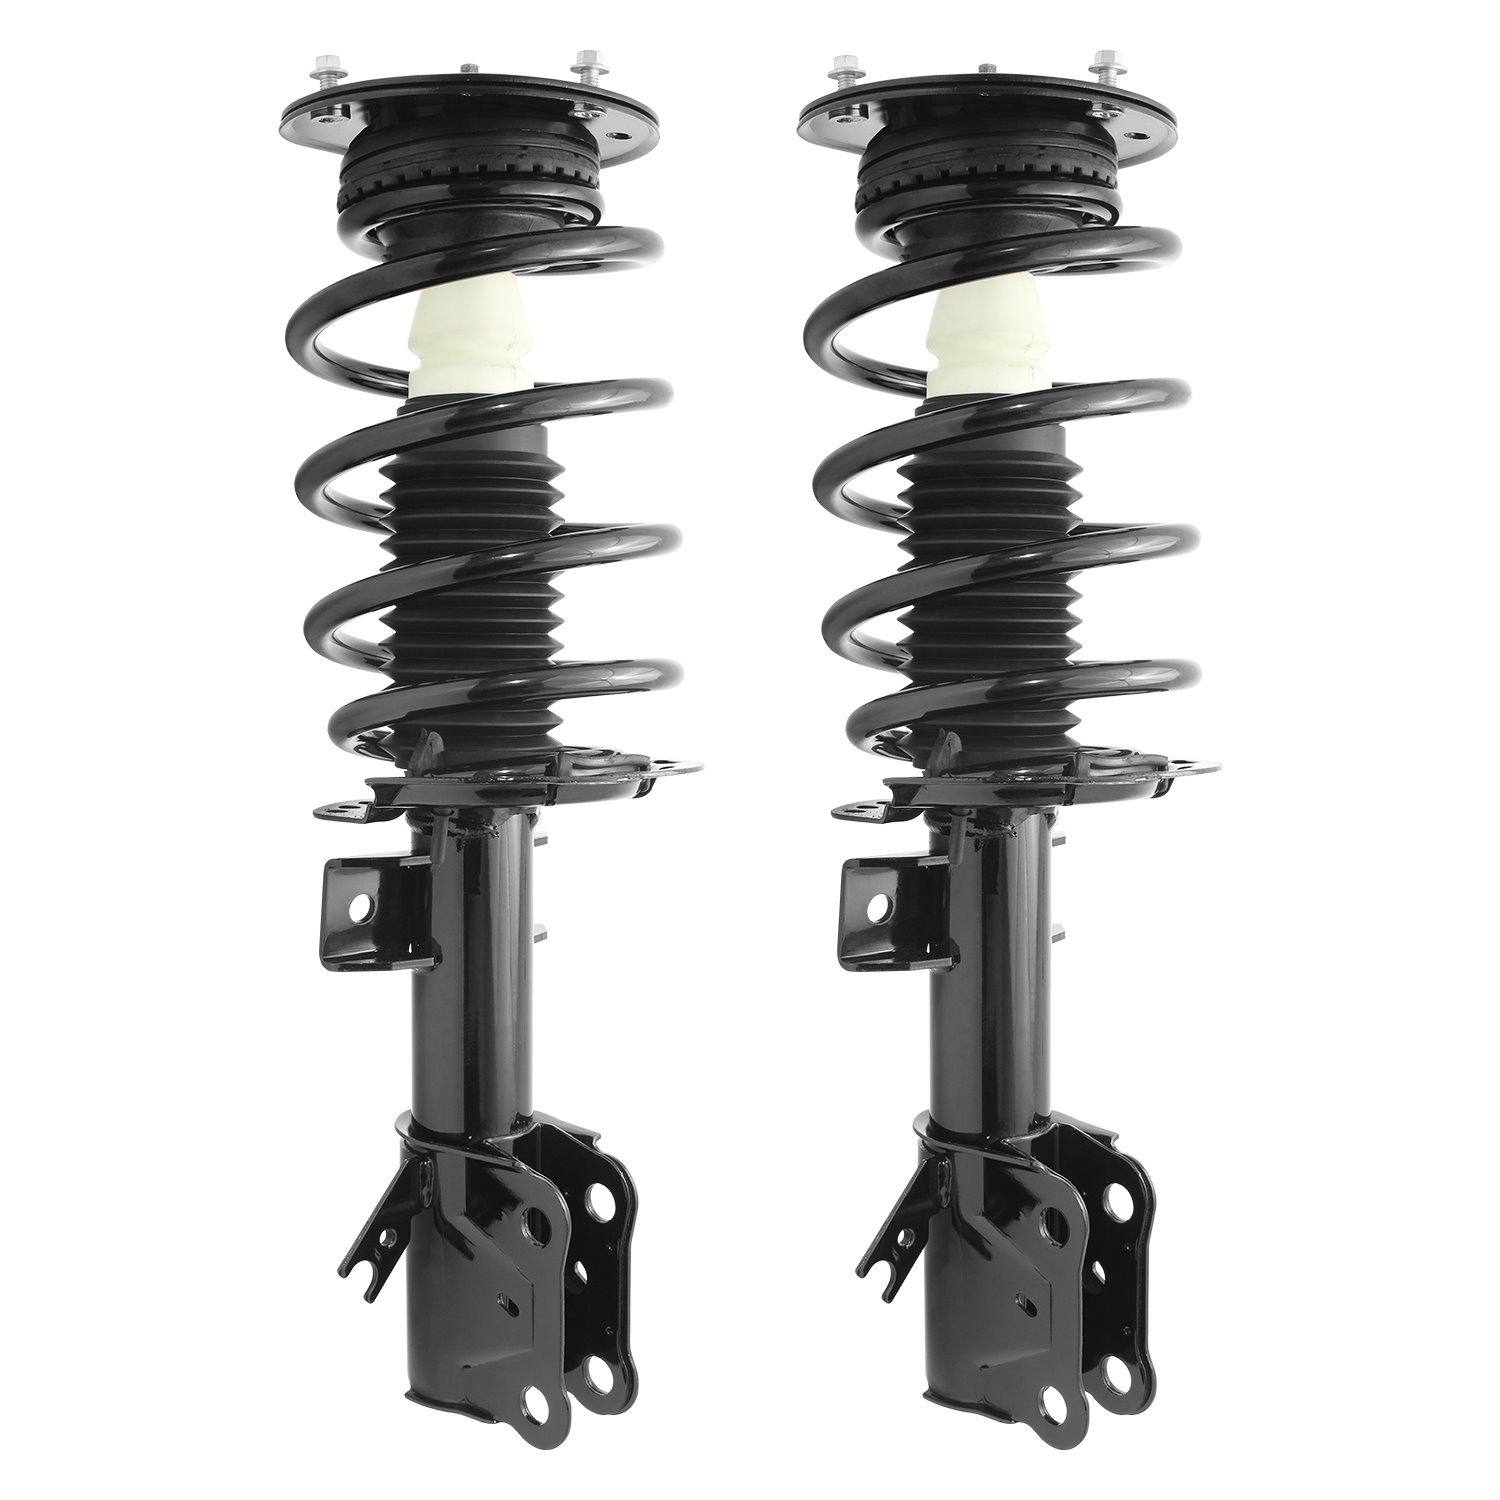 2-11840-001 Suspension Strut & Coil Spring Assembly Set Fits Select Ford Fusion